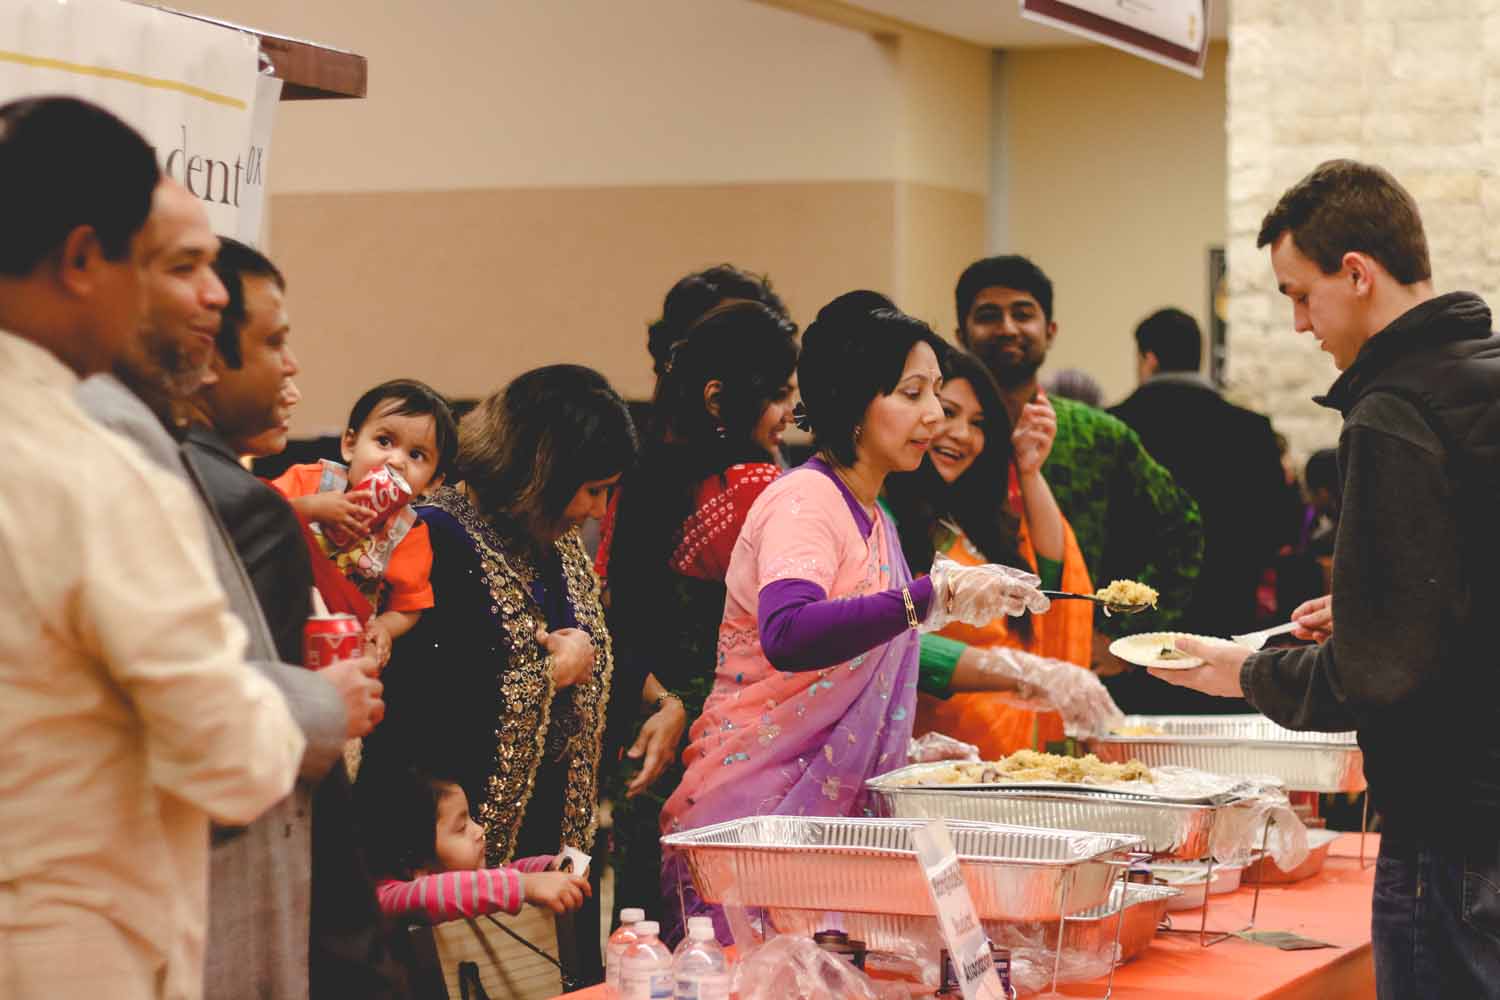 The Bangladesh Student Association shares traditional dishes with fellow MU students. Photo by Hanna Yowell.